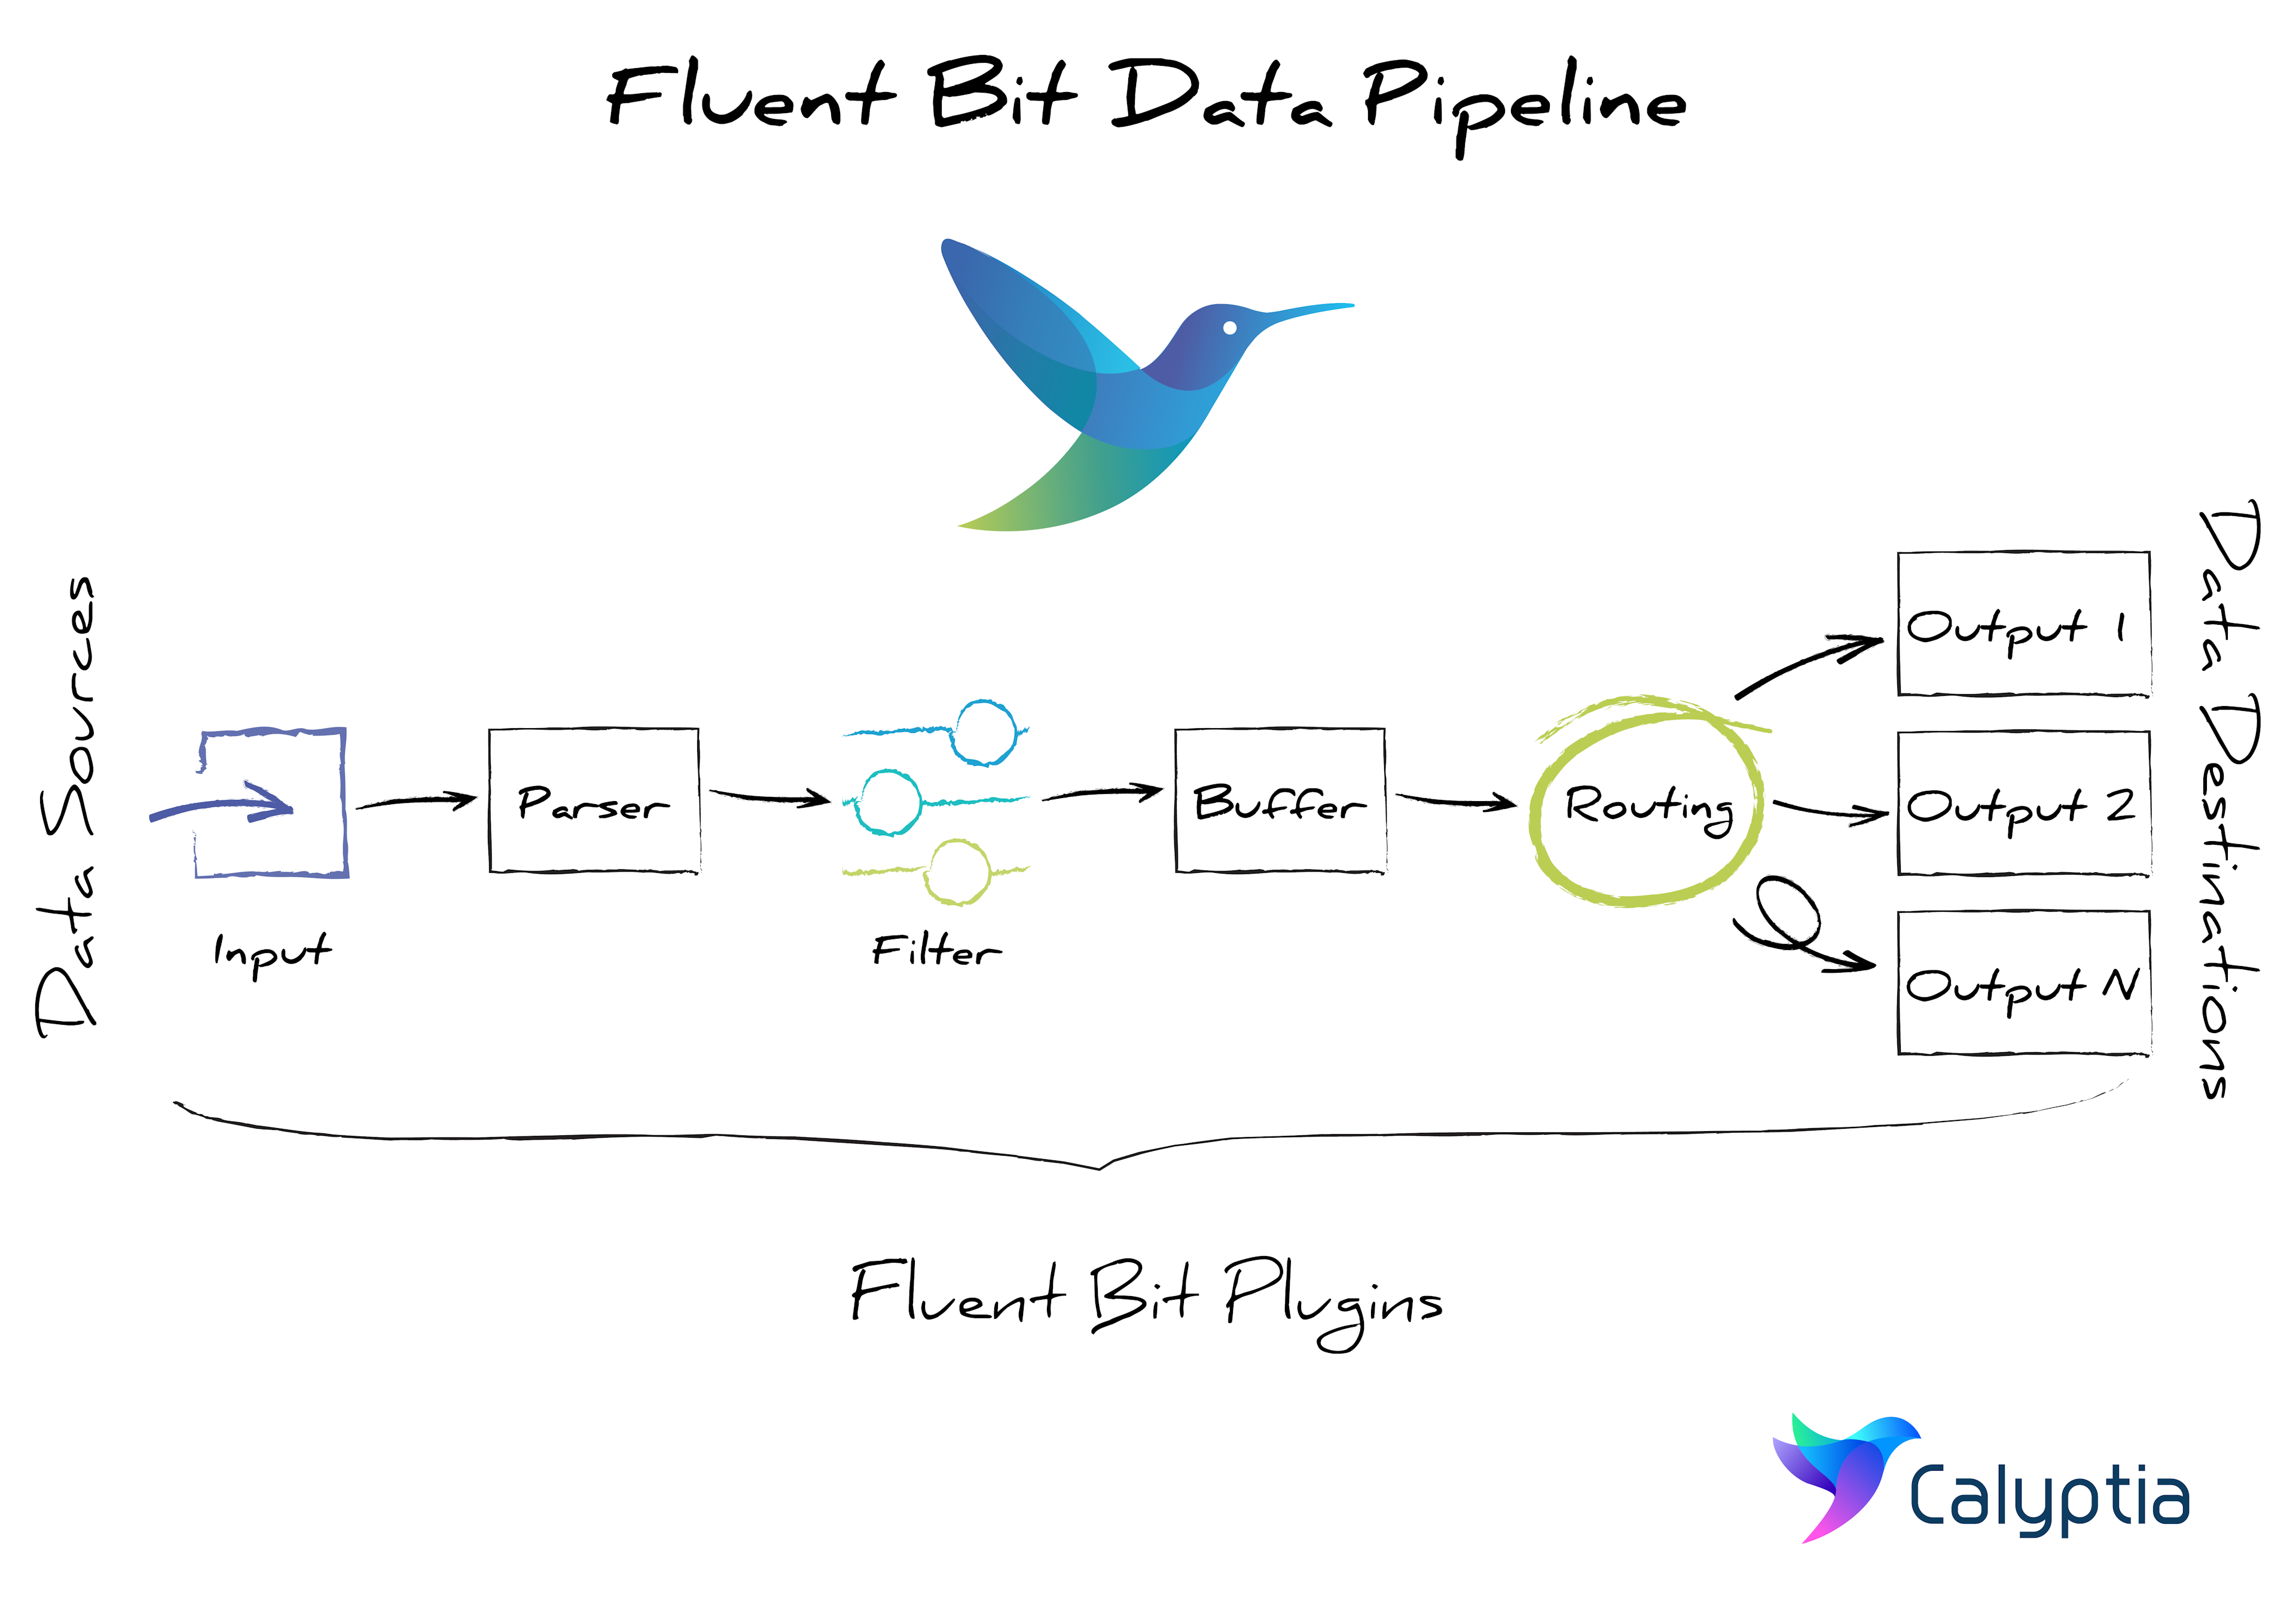 Illustration of a Fluent Bit pipeline showing the role of the various plugins it uses